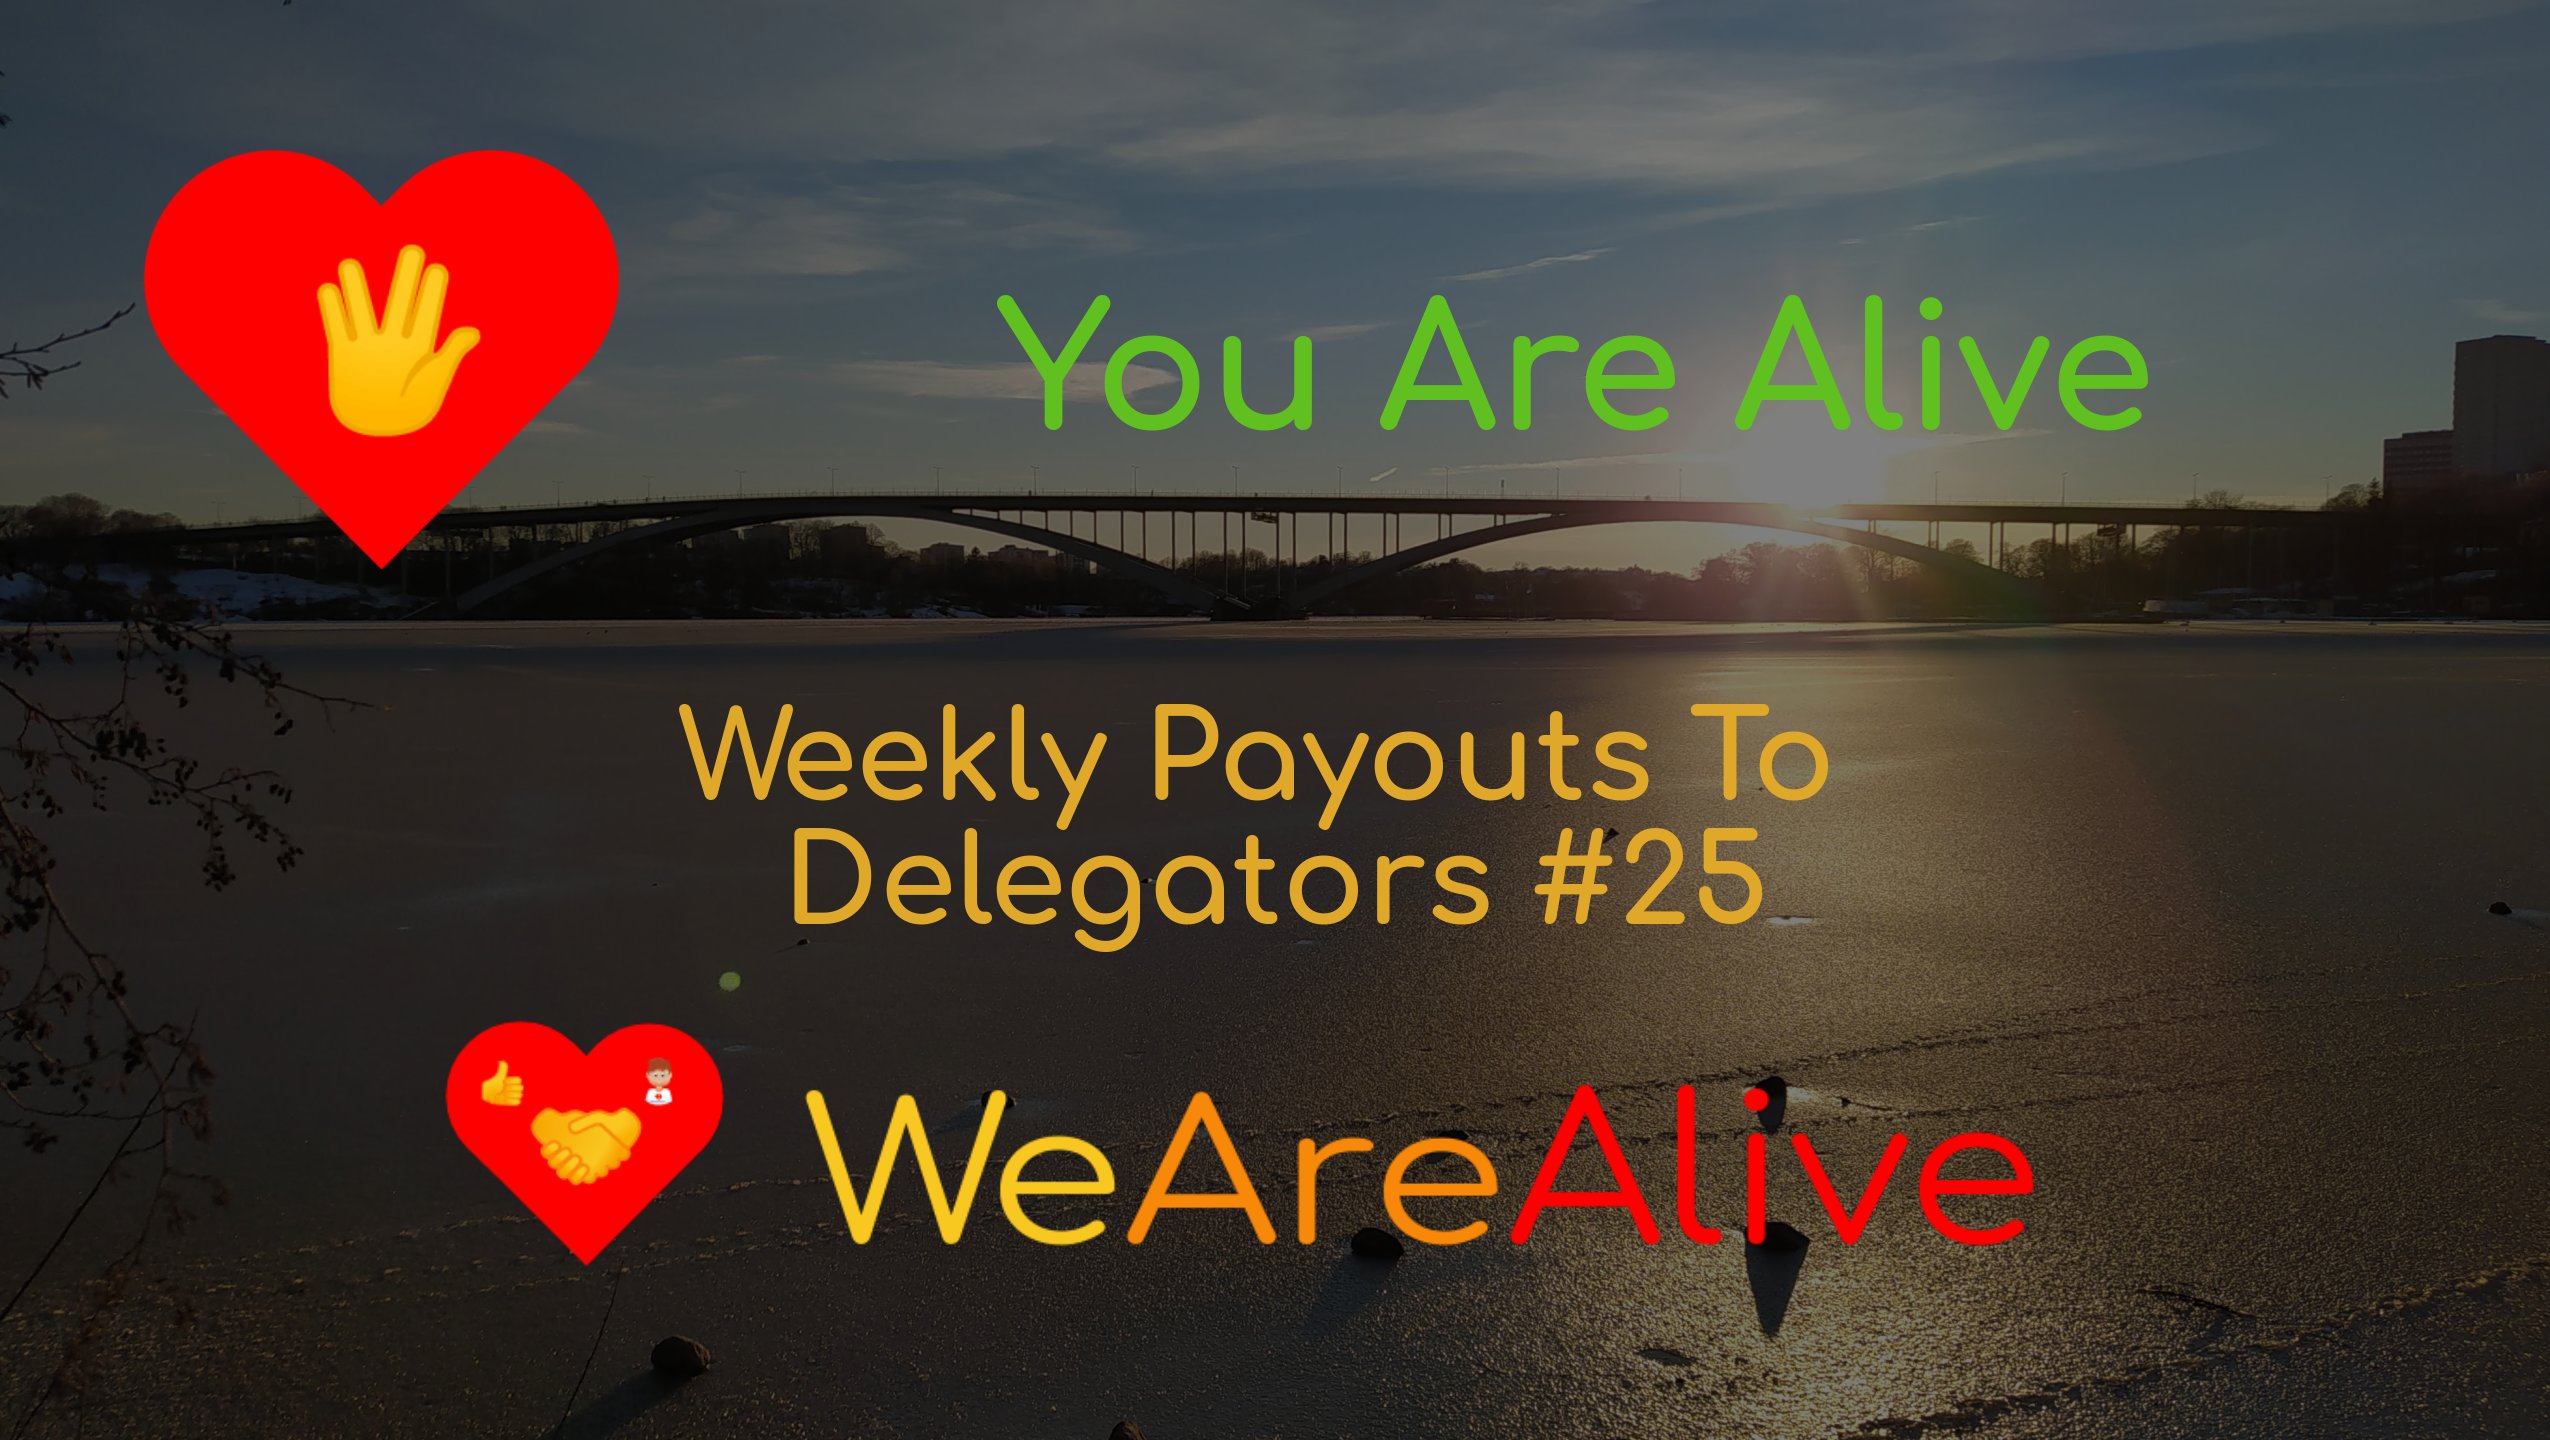 @youarealive/you-are-alive-weekly-payouts-to-hp-delegators-25